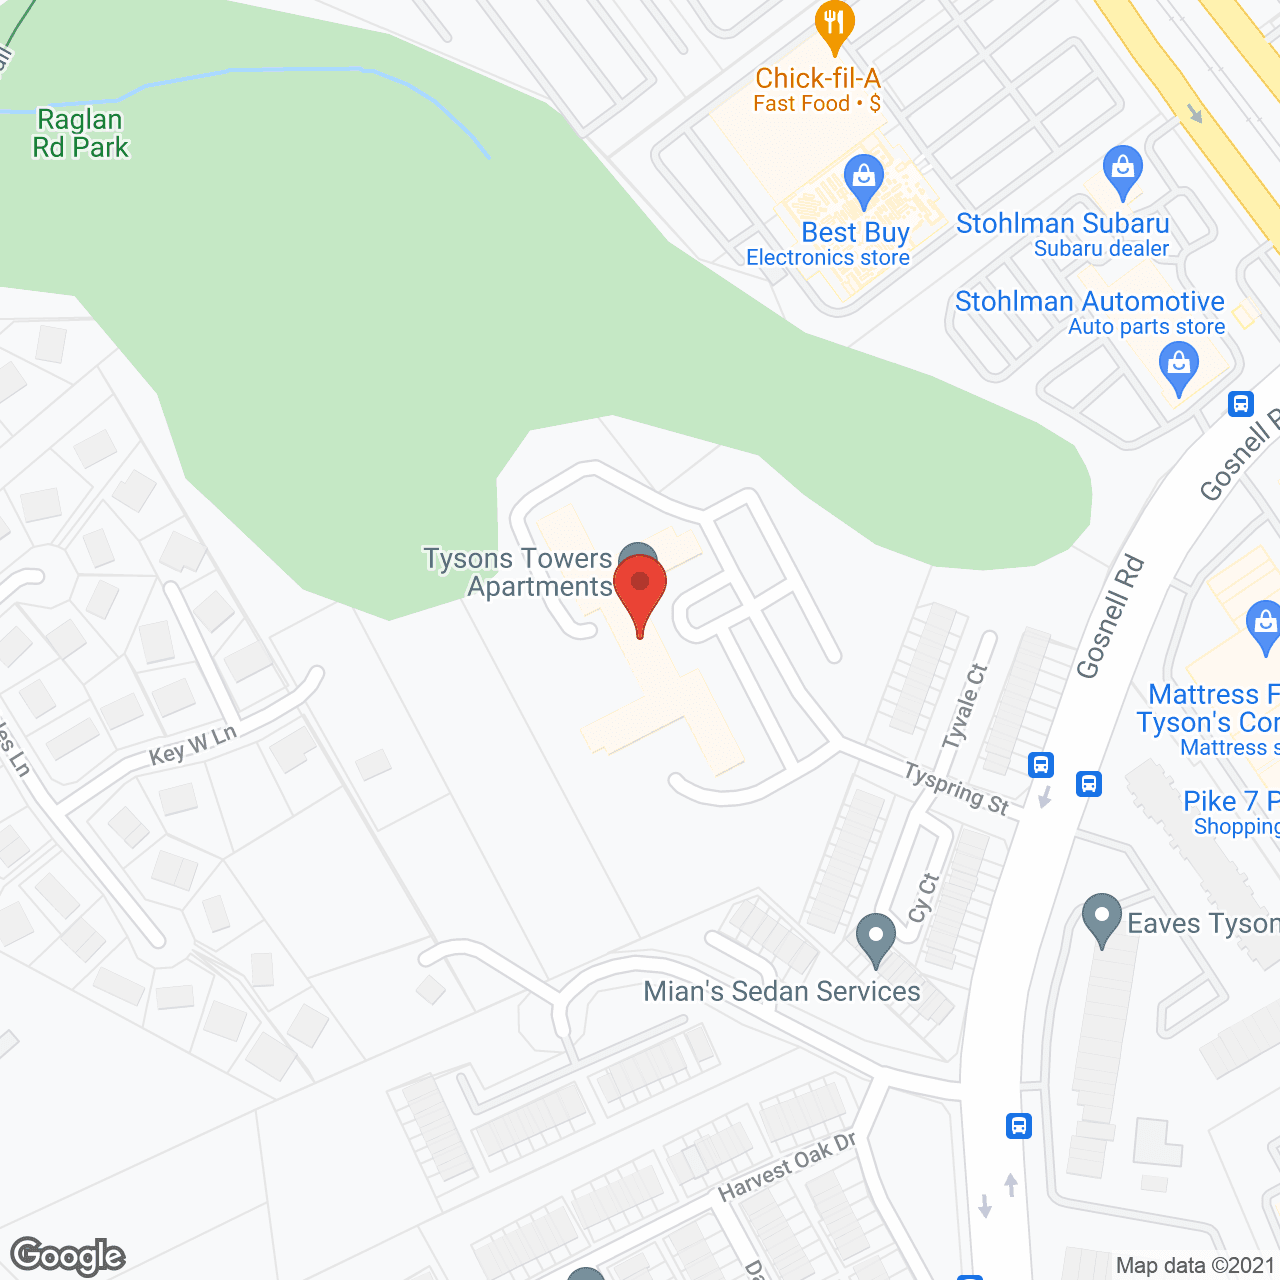 Tysons Towers in google map